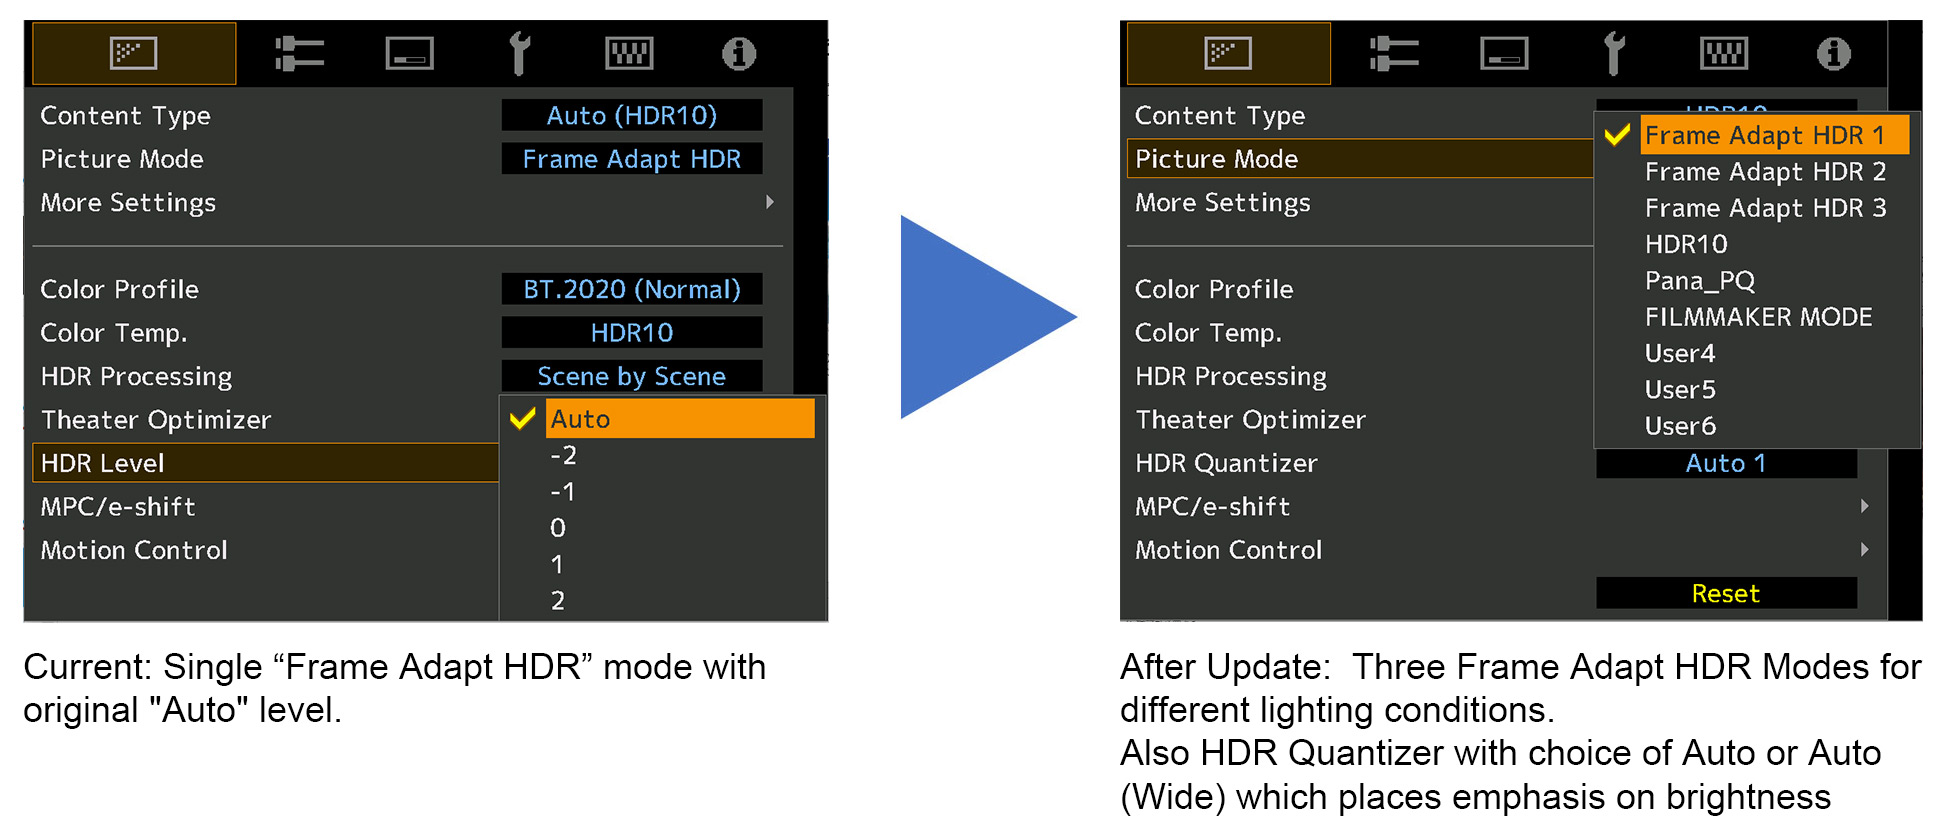 After Update:  Three Frame Adapt HDR Modes for different lighting conditions.Also HDR Quantizer with choice of Auto or Auto (Wide) which places emphasis on brightness